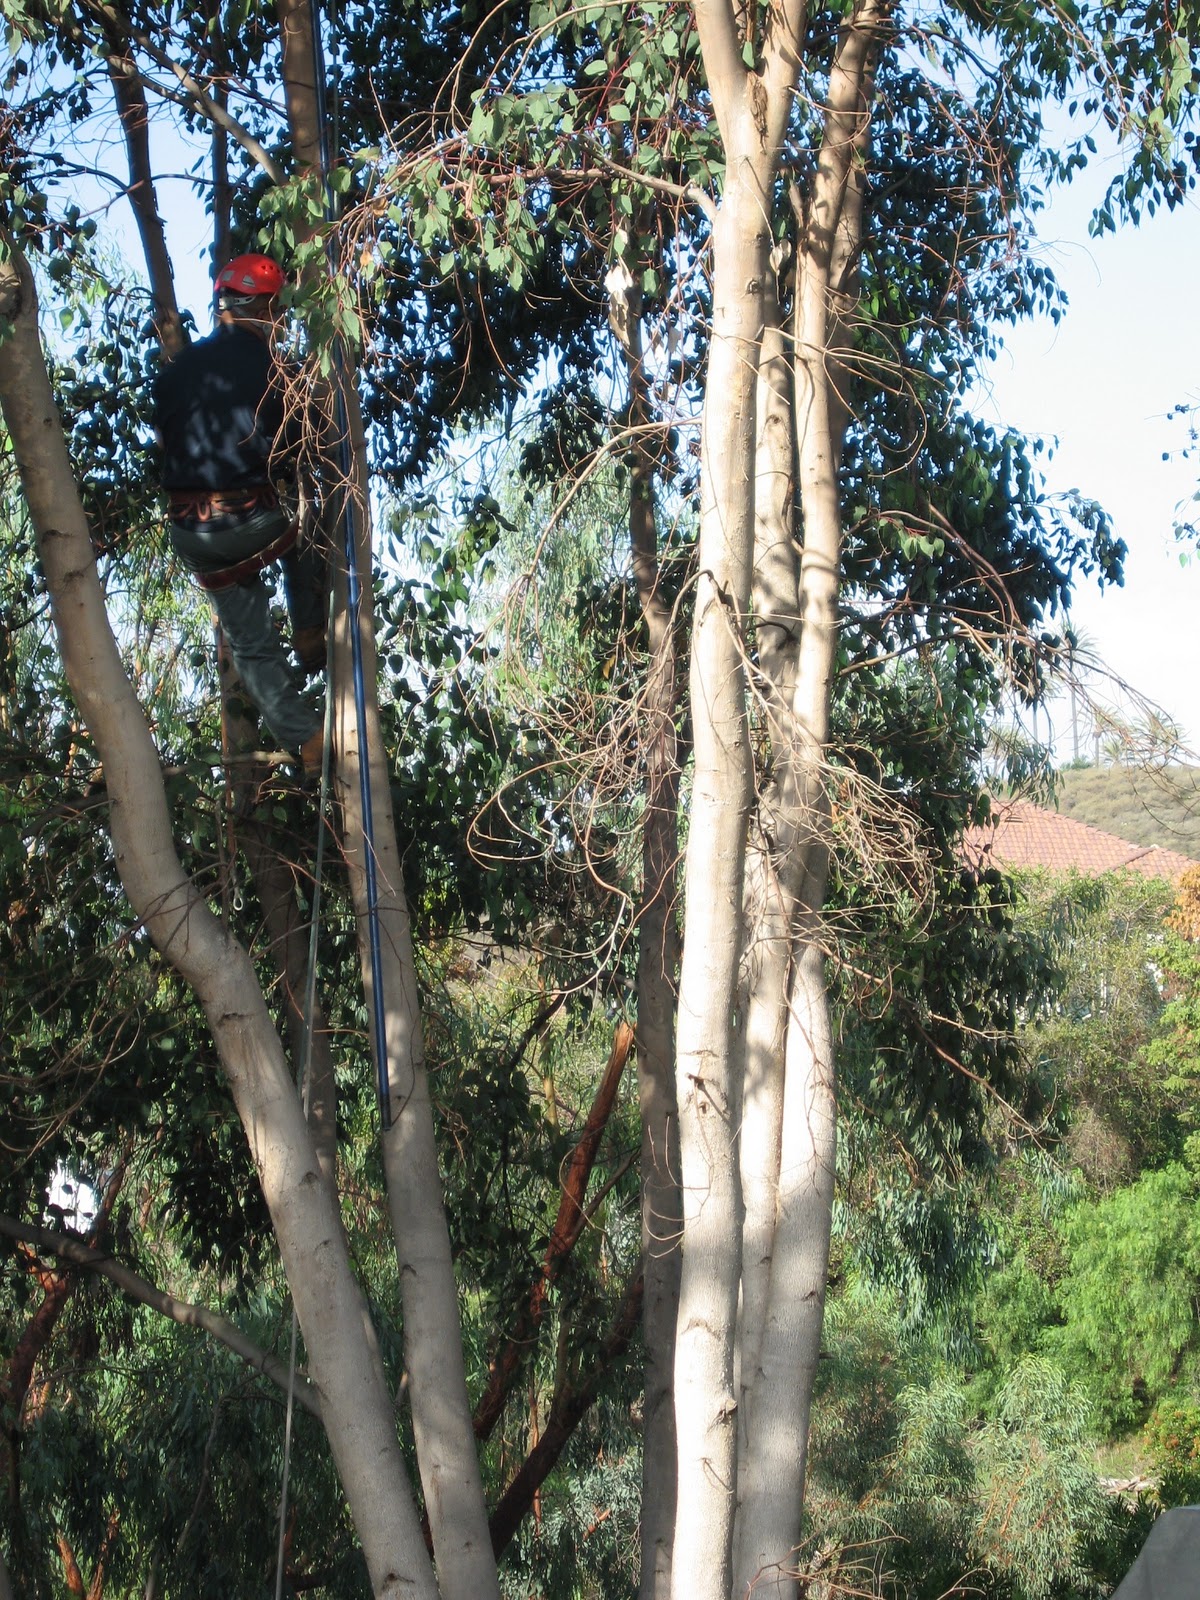 I CA my Gonzales can trim when trees,